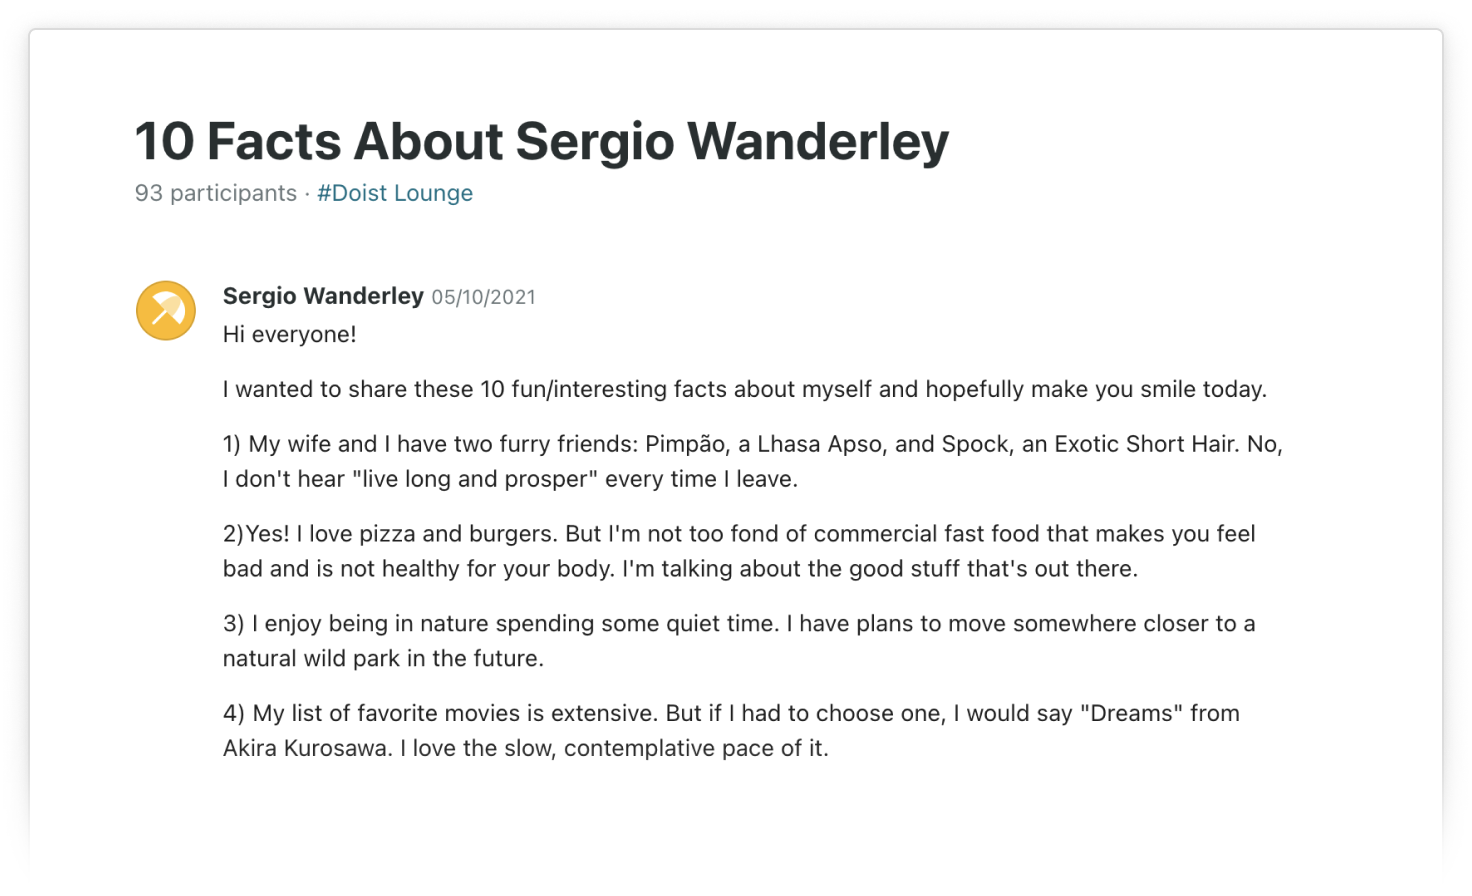 A screenshot of typical "!0 Facts" thread, featuring several facts about Doister Sergio Wanderley, on topics like pets, food, nature, and movies. End description. 